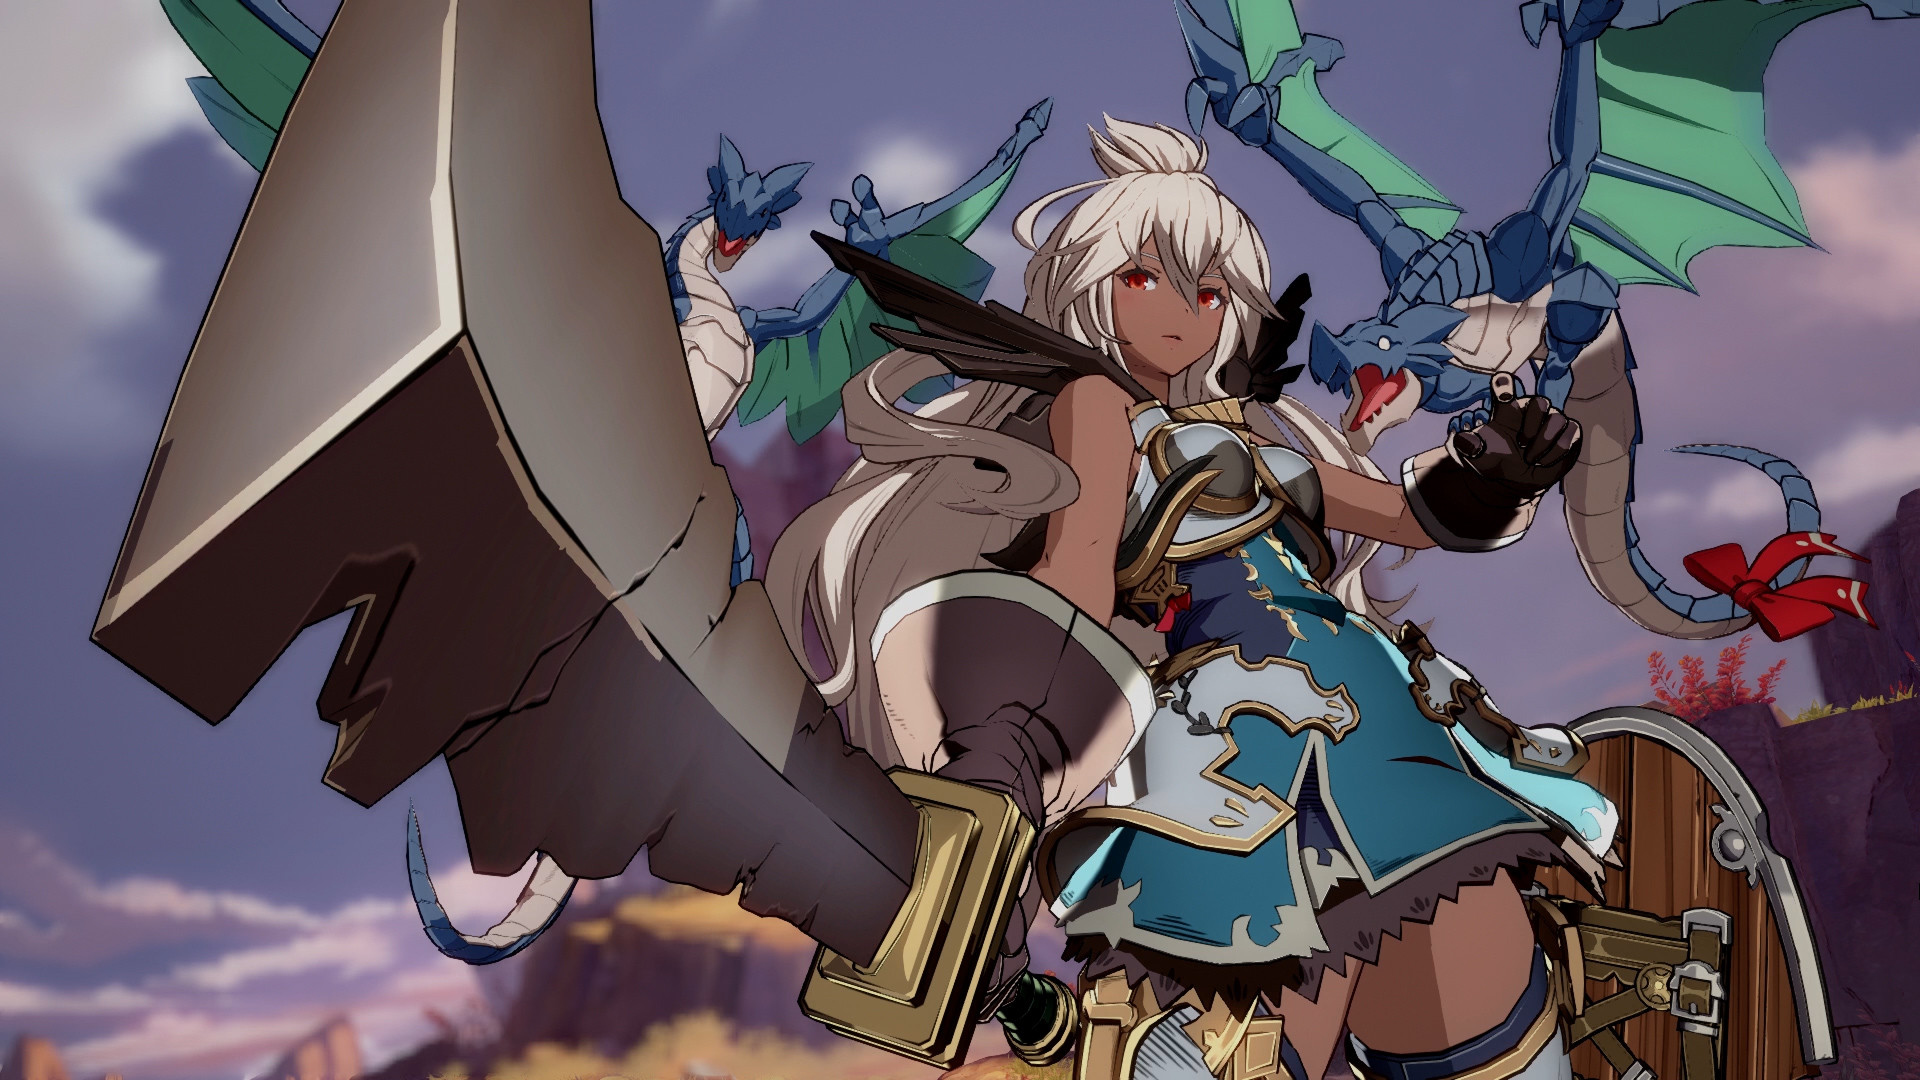 Zooey Finally Makes An Appearance In Granblue Fantasy: Versus